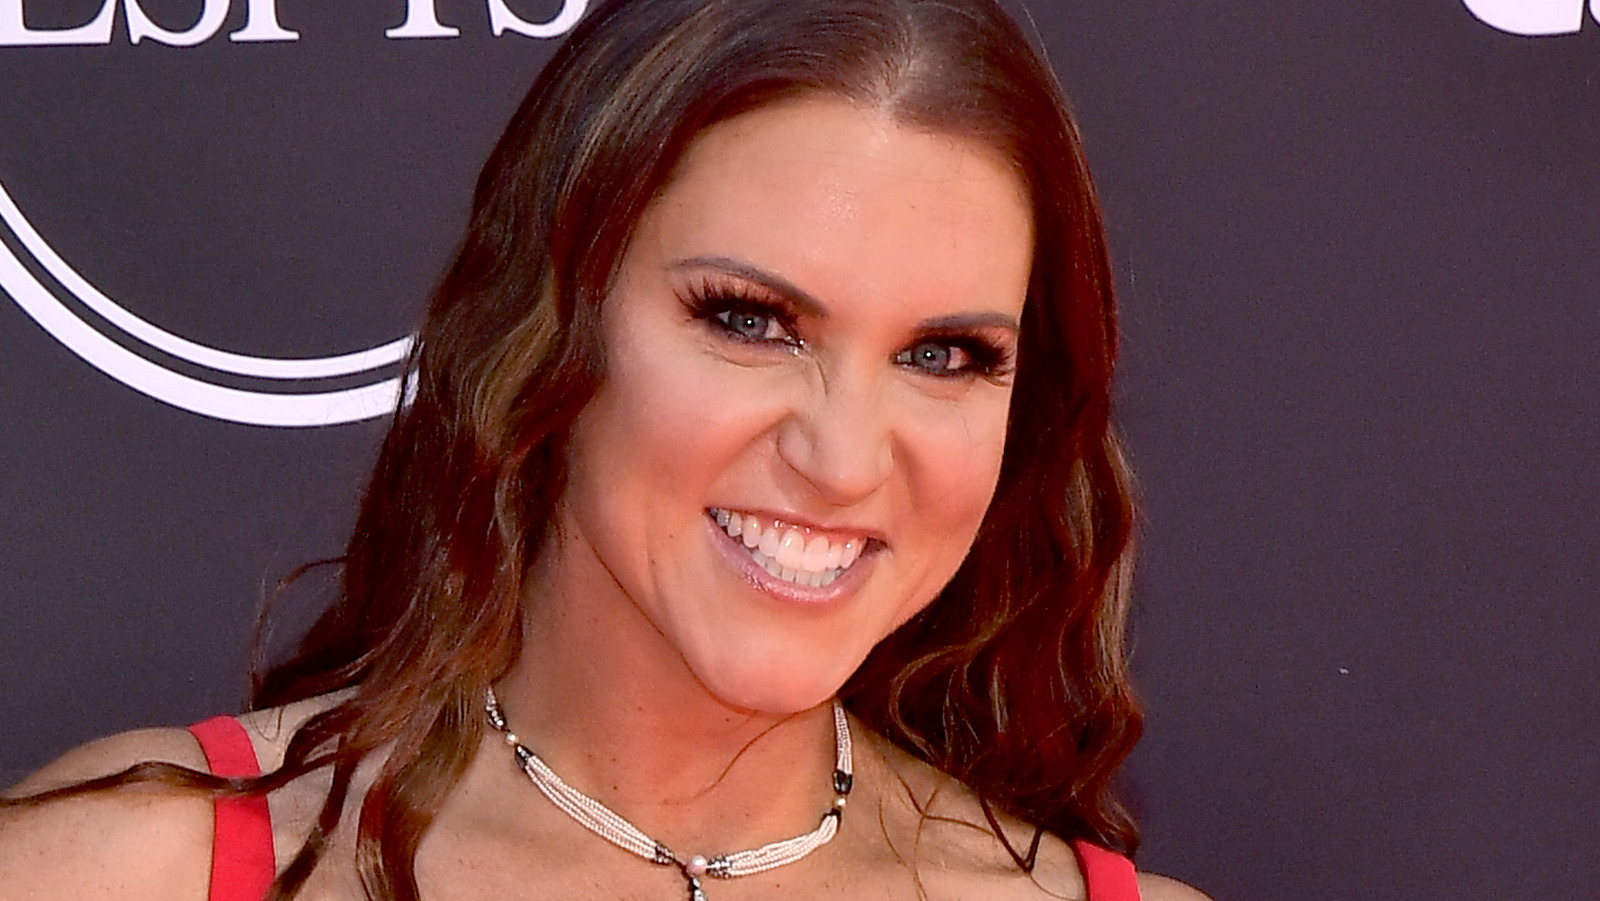 Former Wwe Writer Discusses Time With Stephanie Mcmahon On Creative Team